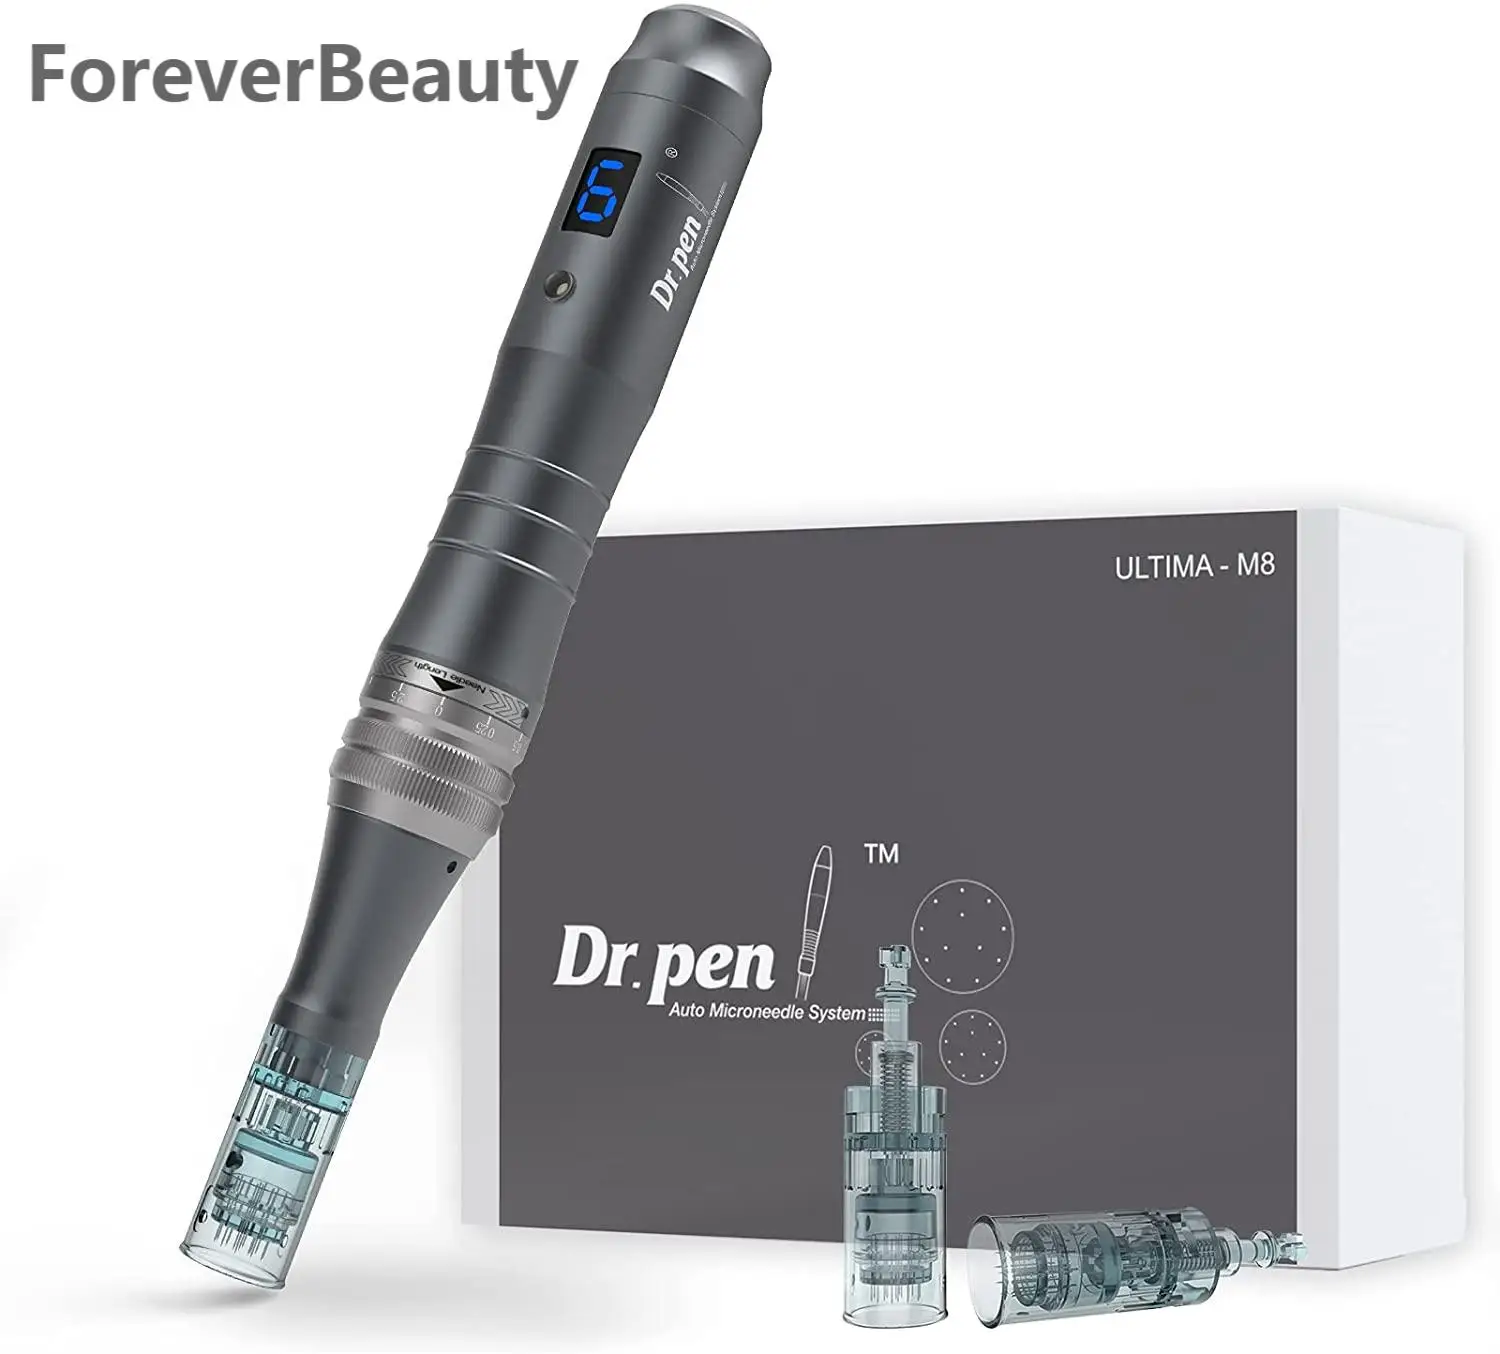 Authentic Dr pen Ultima M8 Wireless Microneedling Needles Face Care Wireless Derma Pen Auto Mesotherapy Skin Care Beauty Machine